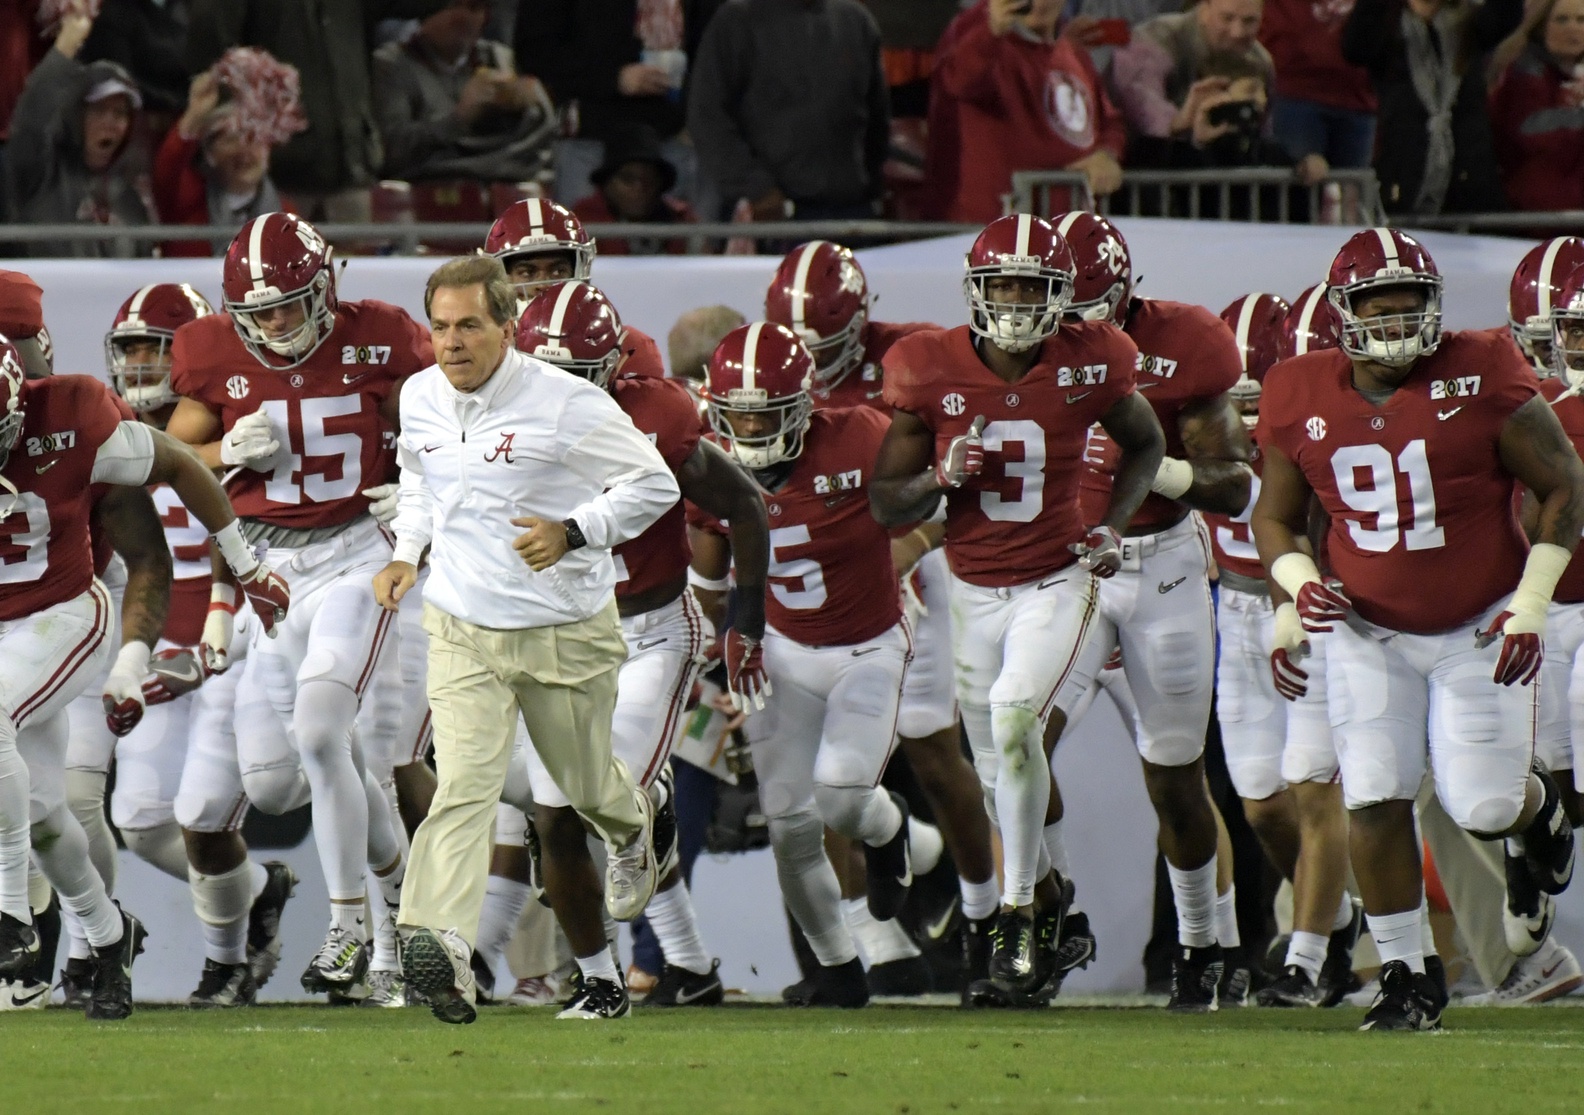 Jan 9, 2017; Tampa, FL, USA; Alabama Crimson Tide head coach Nick Saban leads his team onto the field for the second half against the Clemson Tigers in the 2017 College Football Playoff National Championship Game at Raymond James Stadium. Mandatory Credit: Kirby Lee-USA TODAY Sports